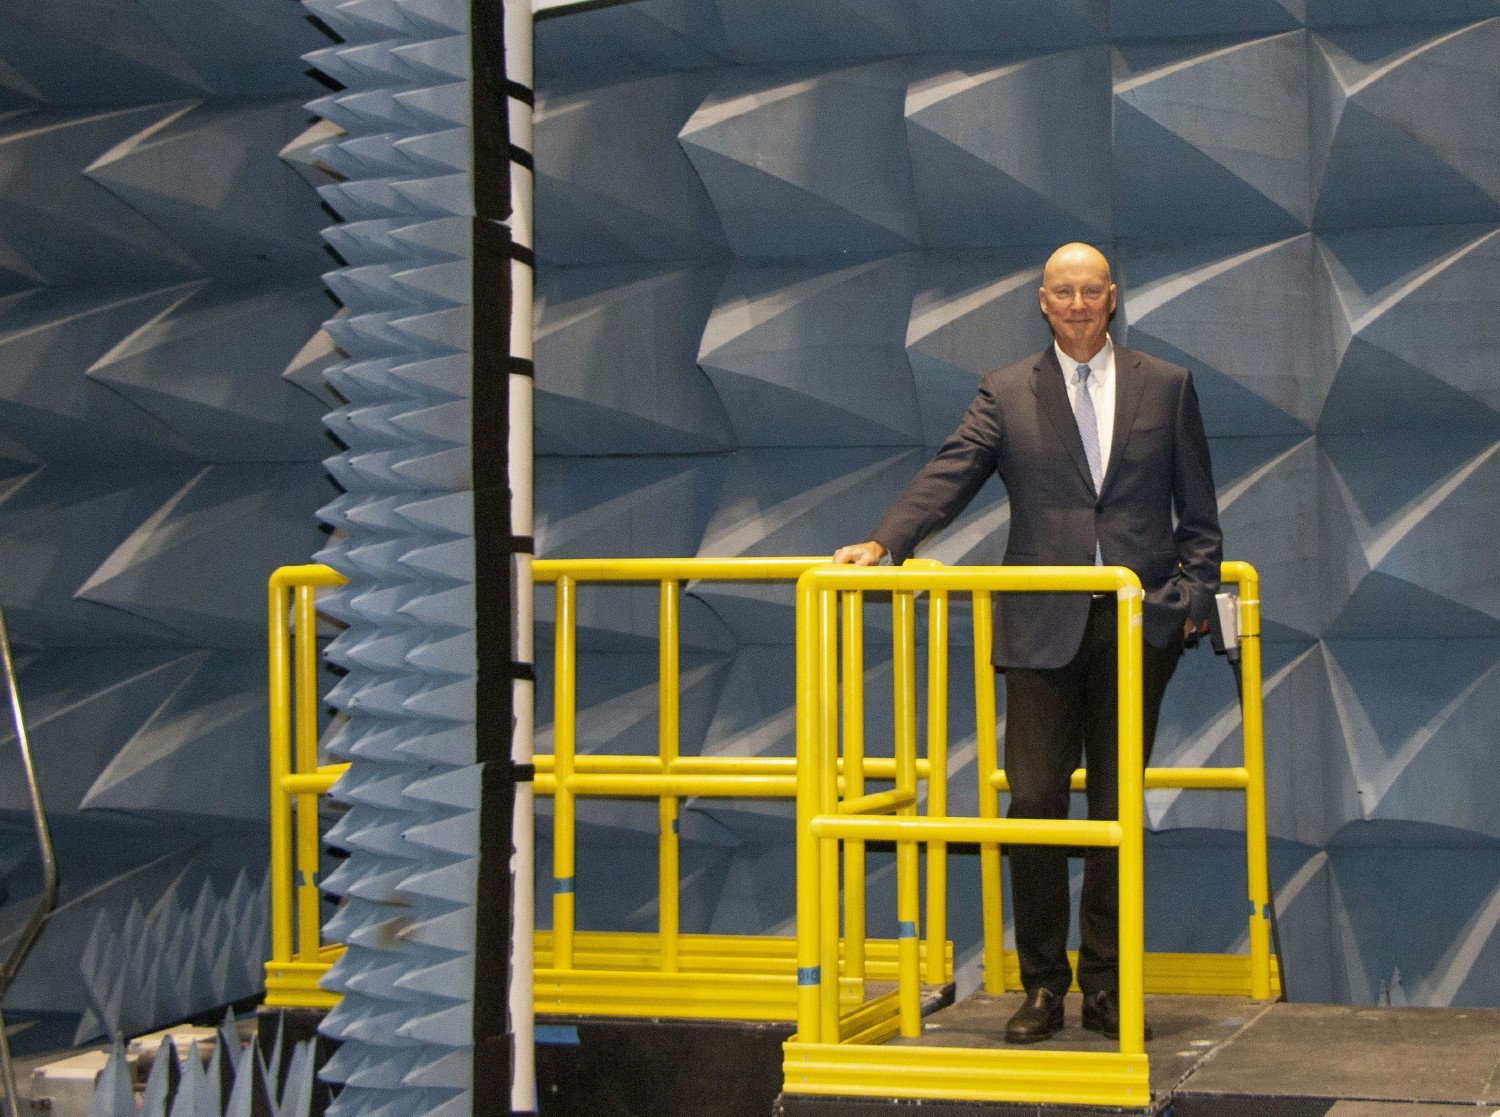 President and CEO Kevin Hair stands in a chamber used to measure and calibrate our radar and communications systems.